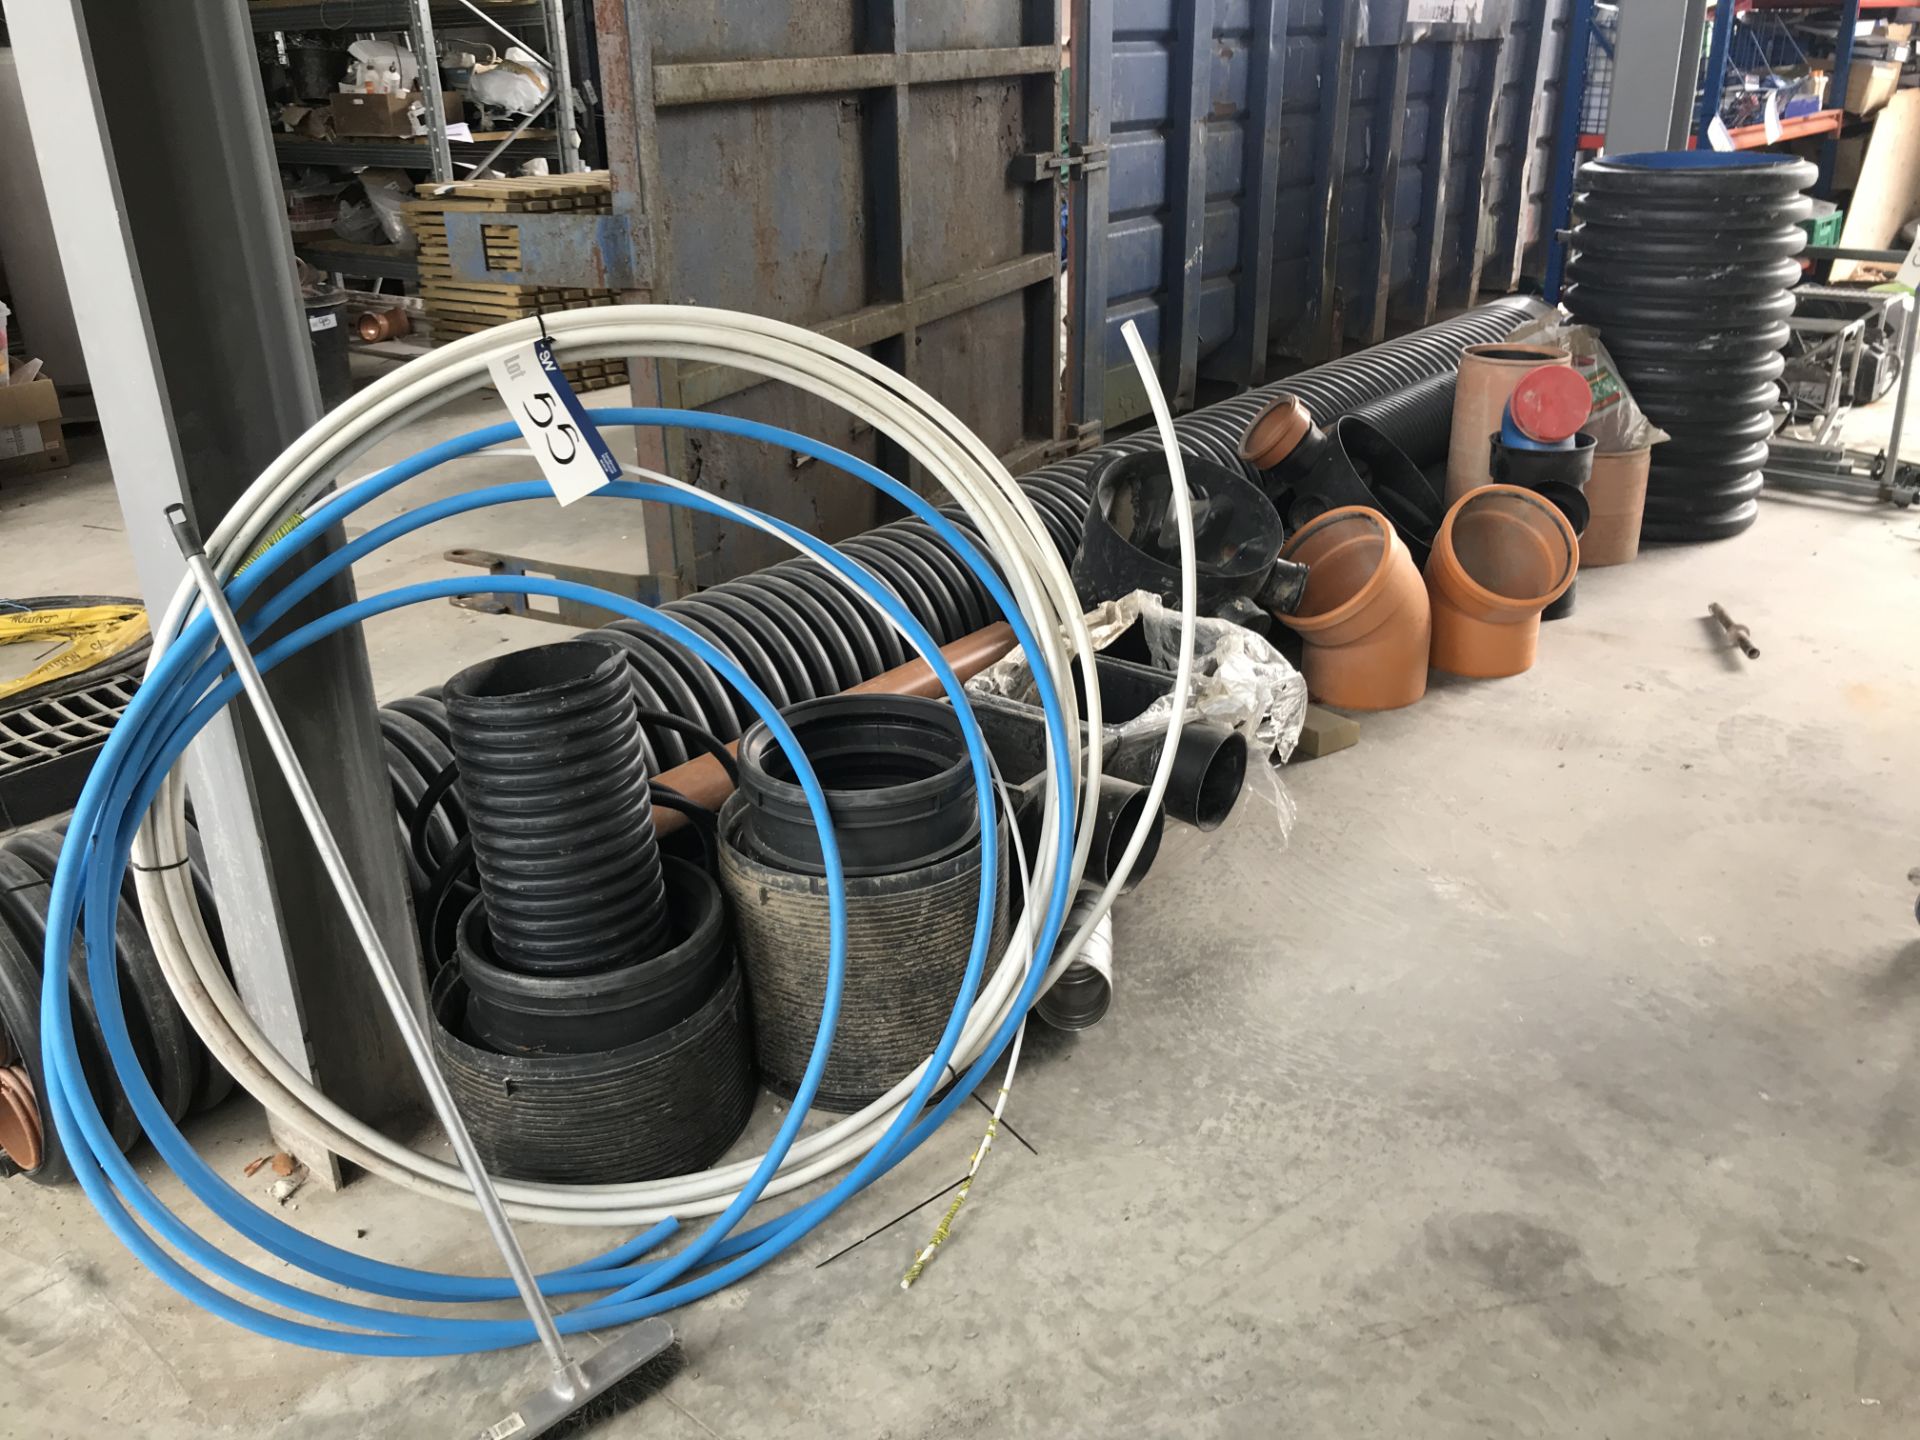 Assorted Piping & Hoses, as set out in one area